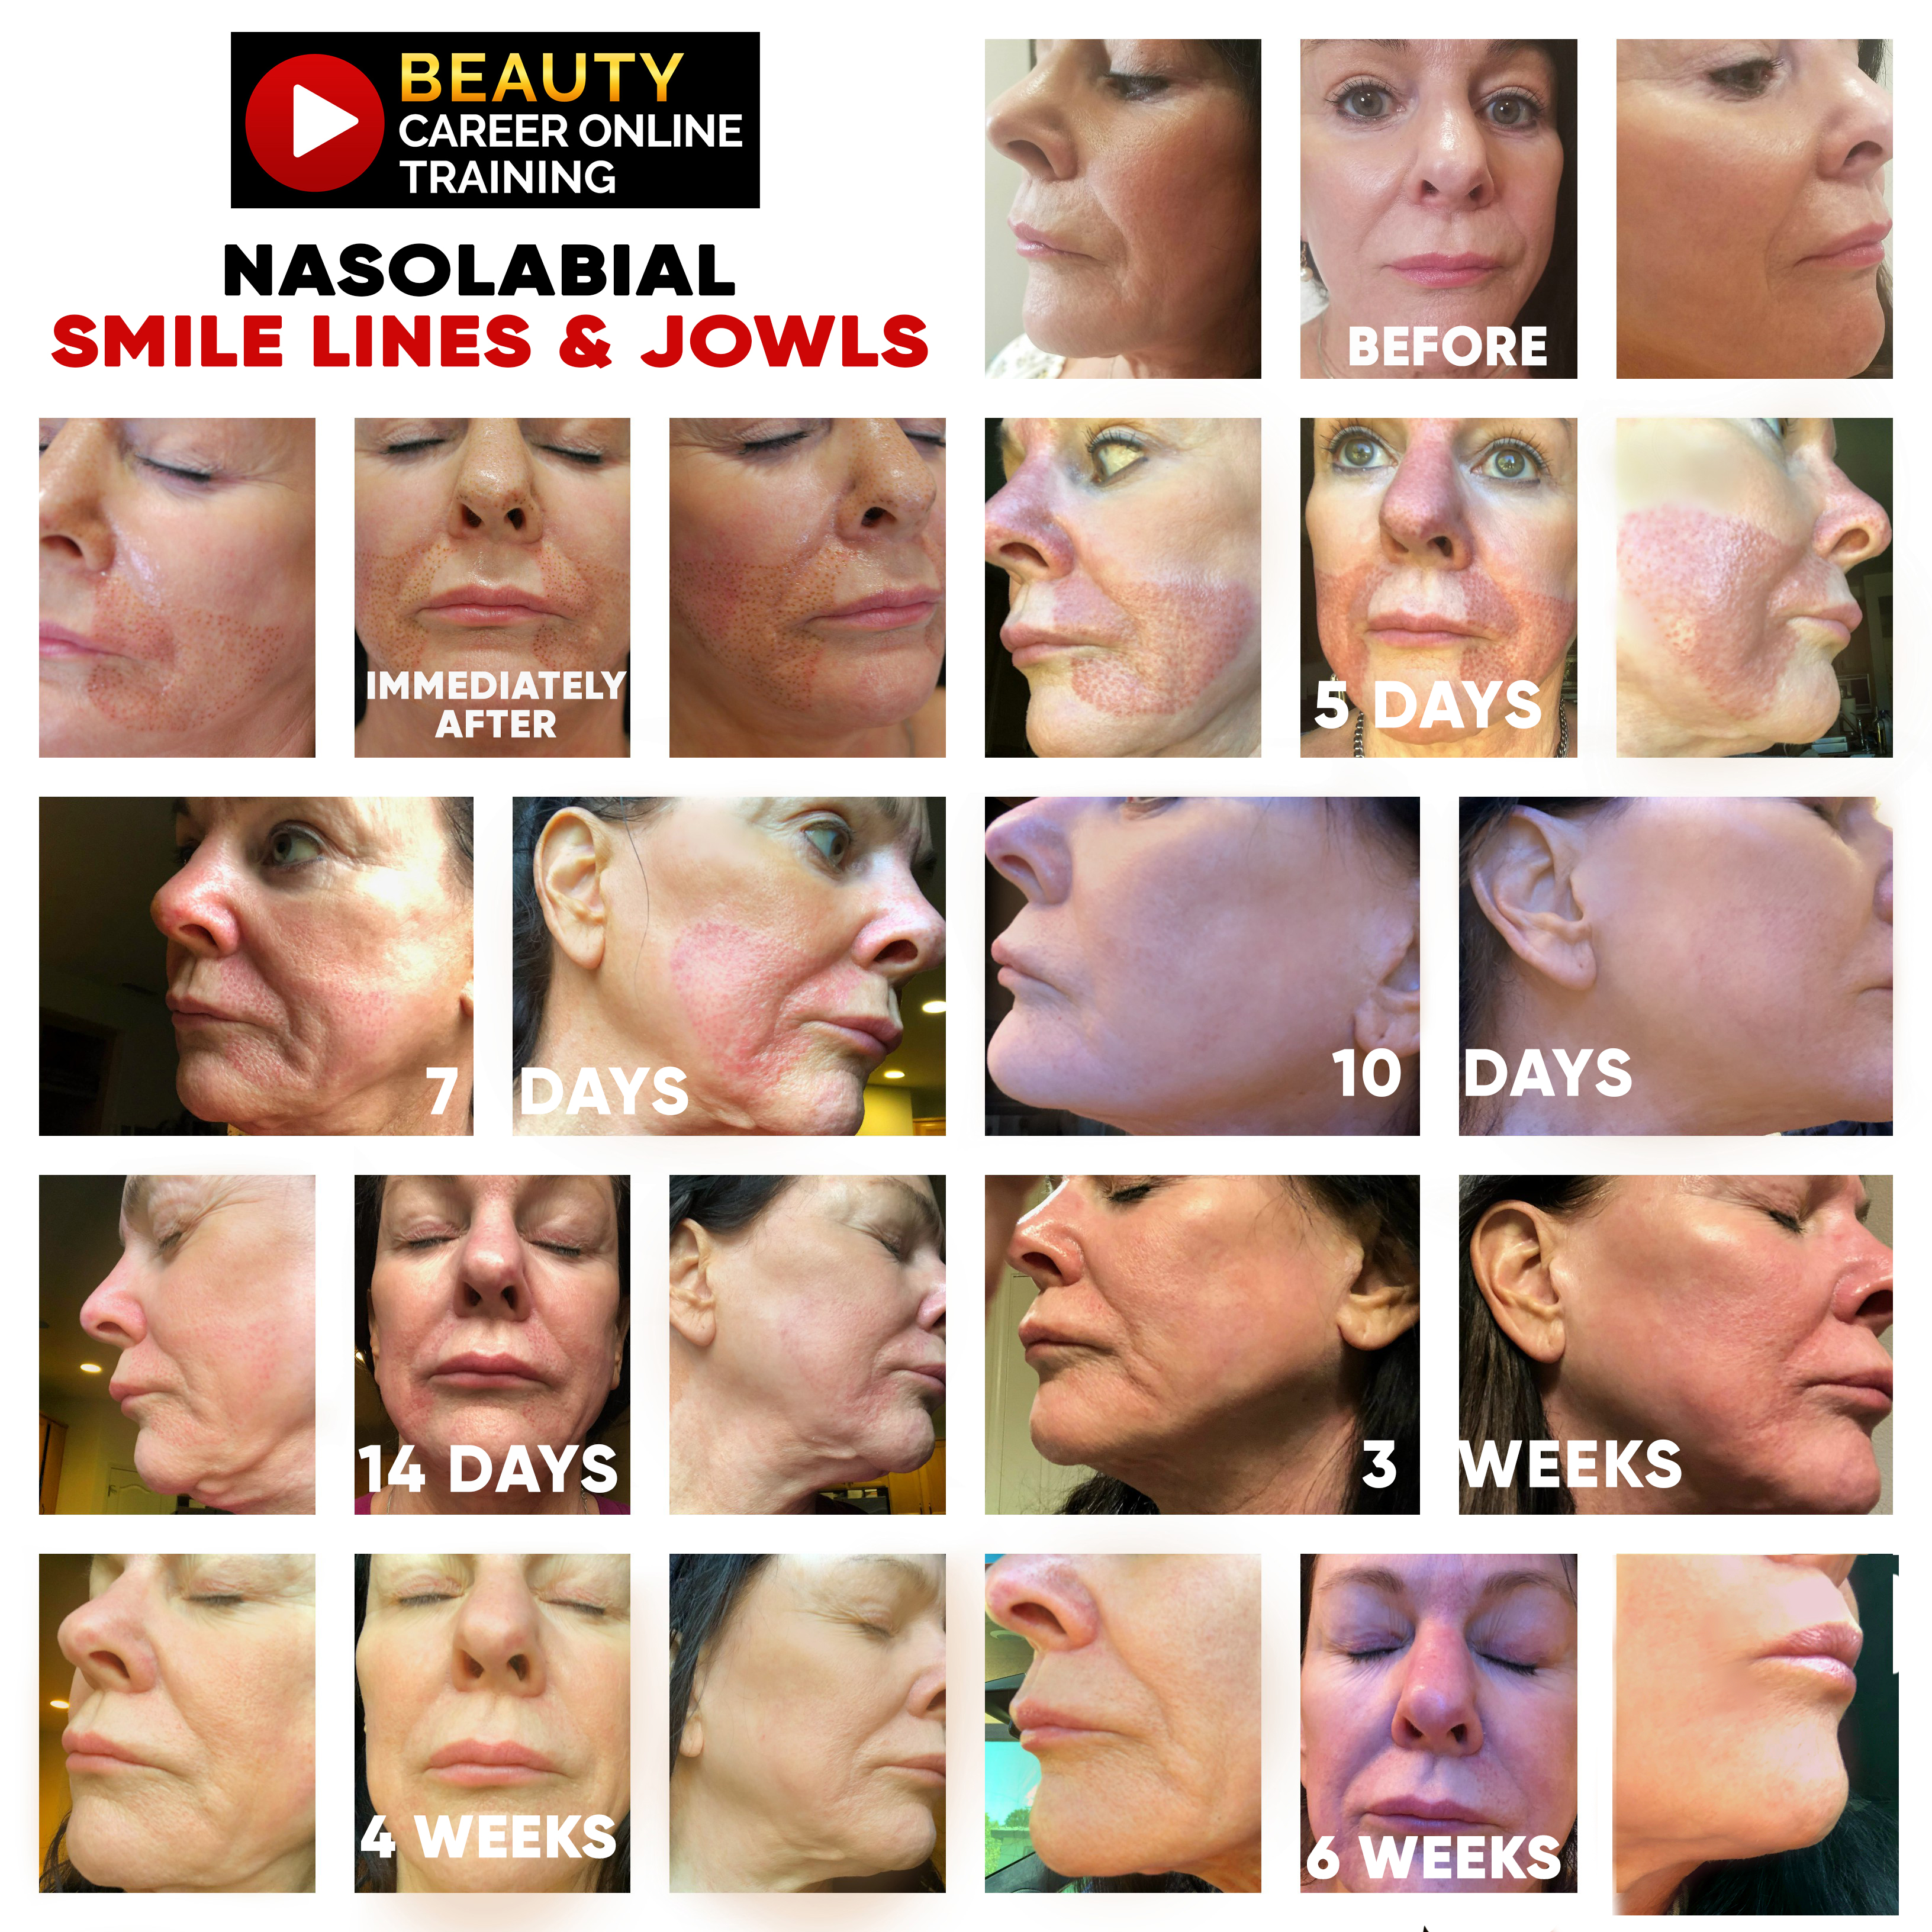 what are jowls, marionette lines, how to get rid of jowls, tighten jowls, ultherapy, plasma pen lift, plasma pen, firoblast plasma, plasma fibroblast, sagging jowls, jowls treatment, jowls face, sagging jowls botox, sagging jawline. jowls in 20s, best procedure for sagging jowls 2020, 2021, laser treatment for sagging jowls 